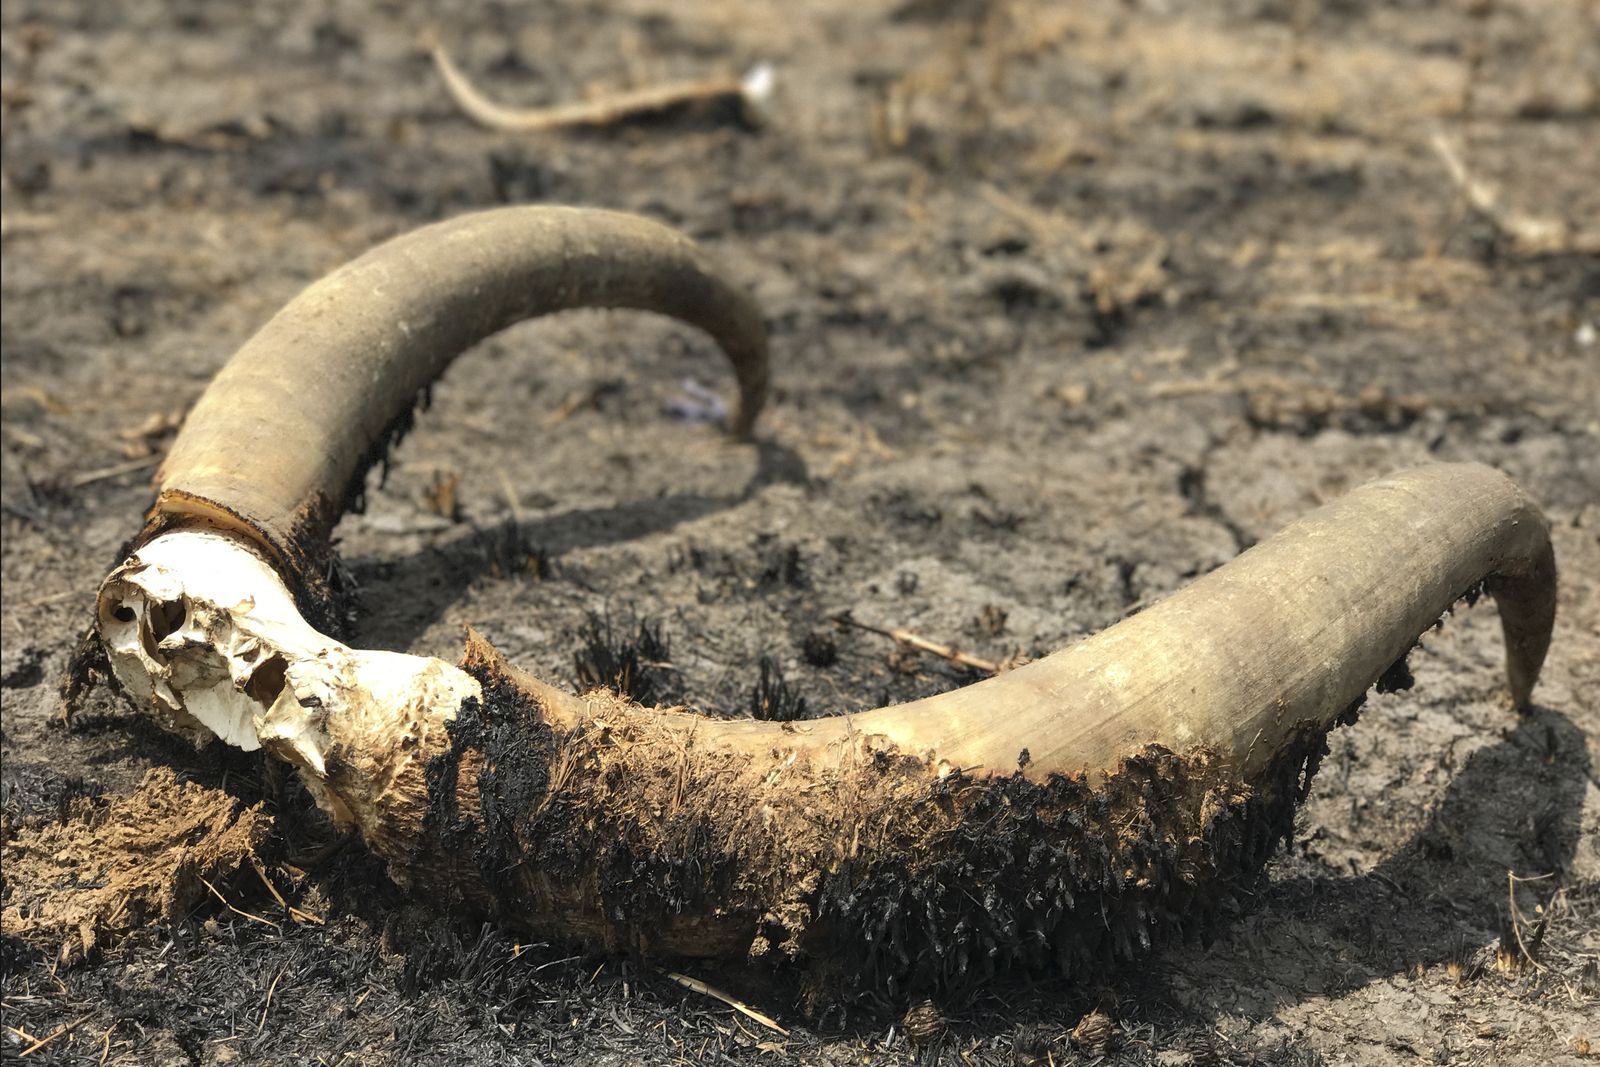 Cow horns near Leer town. In South Sudan, cattle are an important source of income and food. Image by Jane Ferguson. South Sudan, 2017.